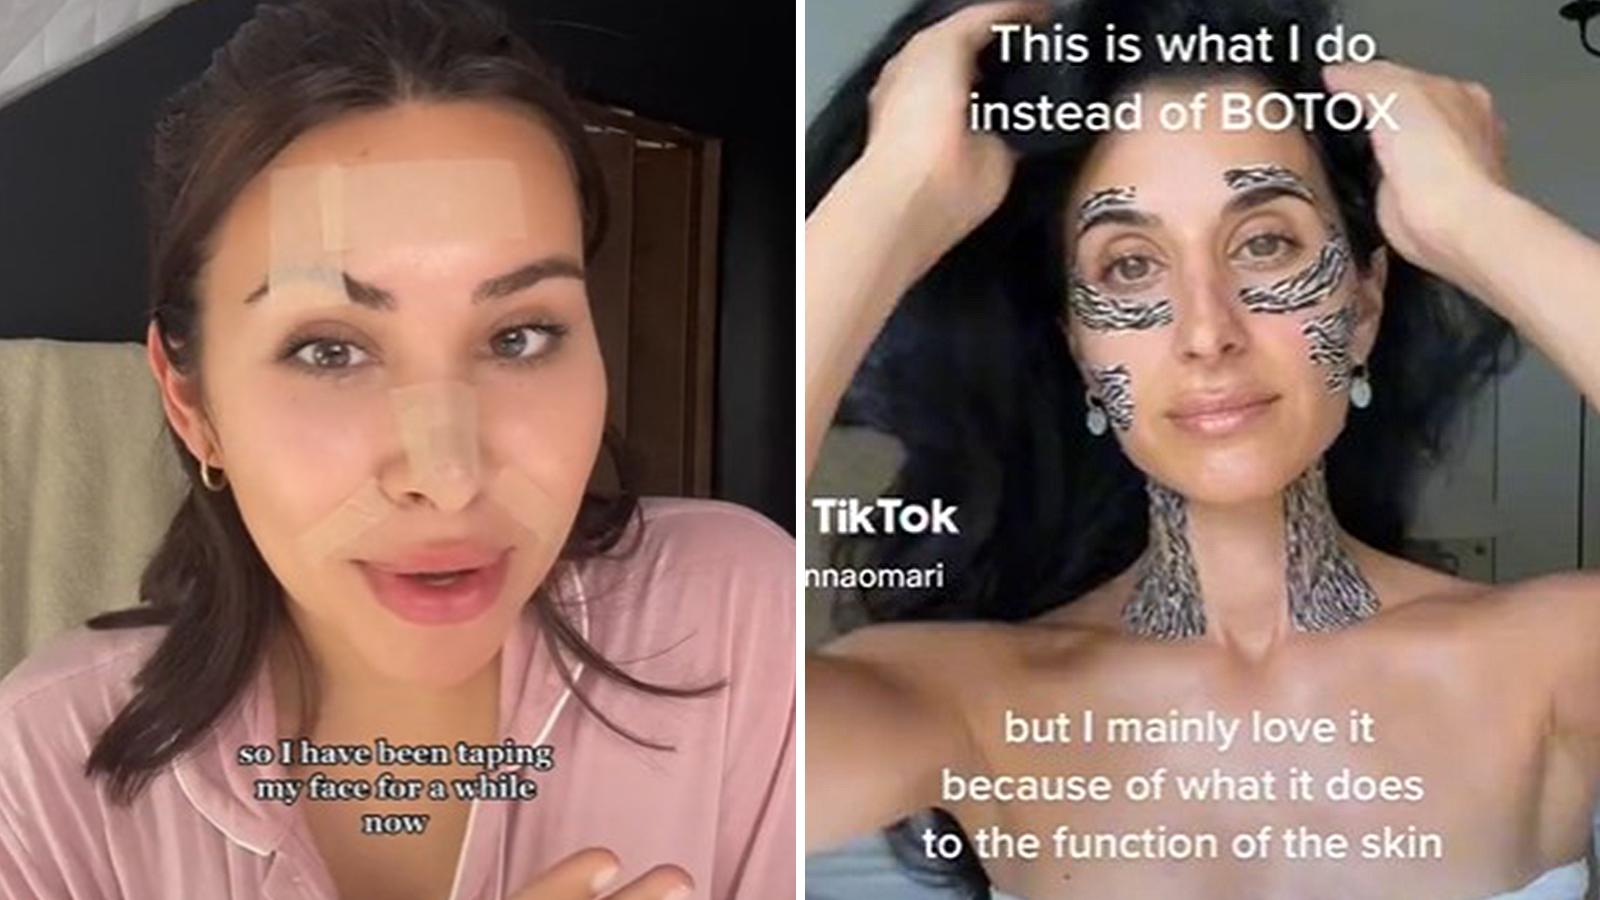 what is tiktok face taping viral skincare trend